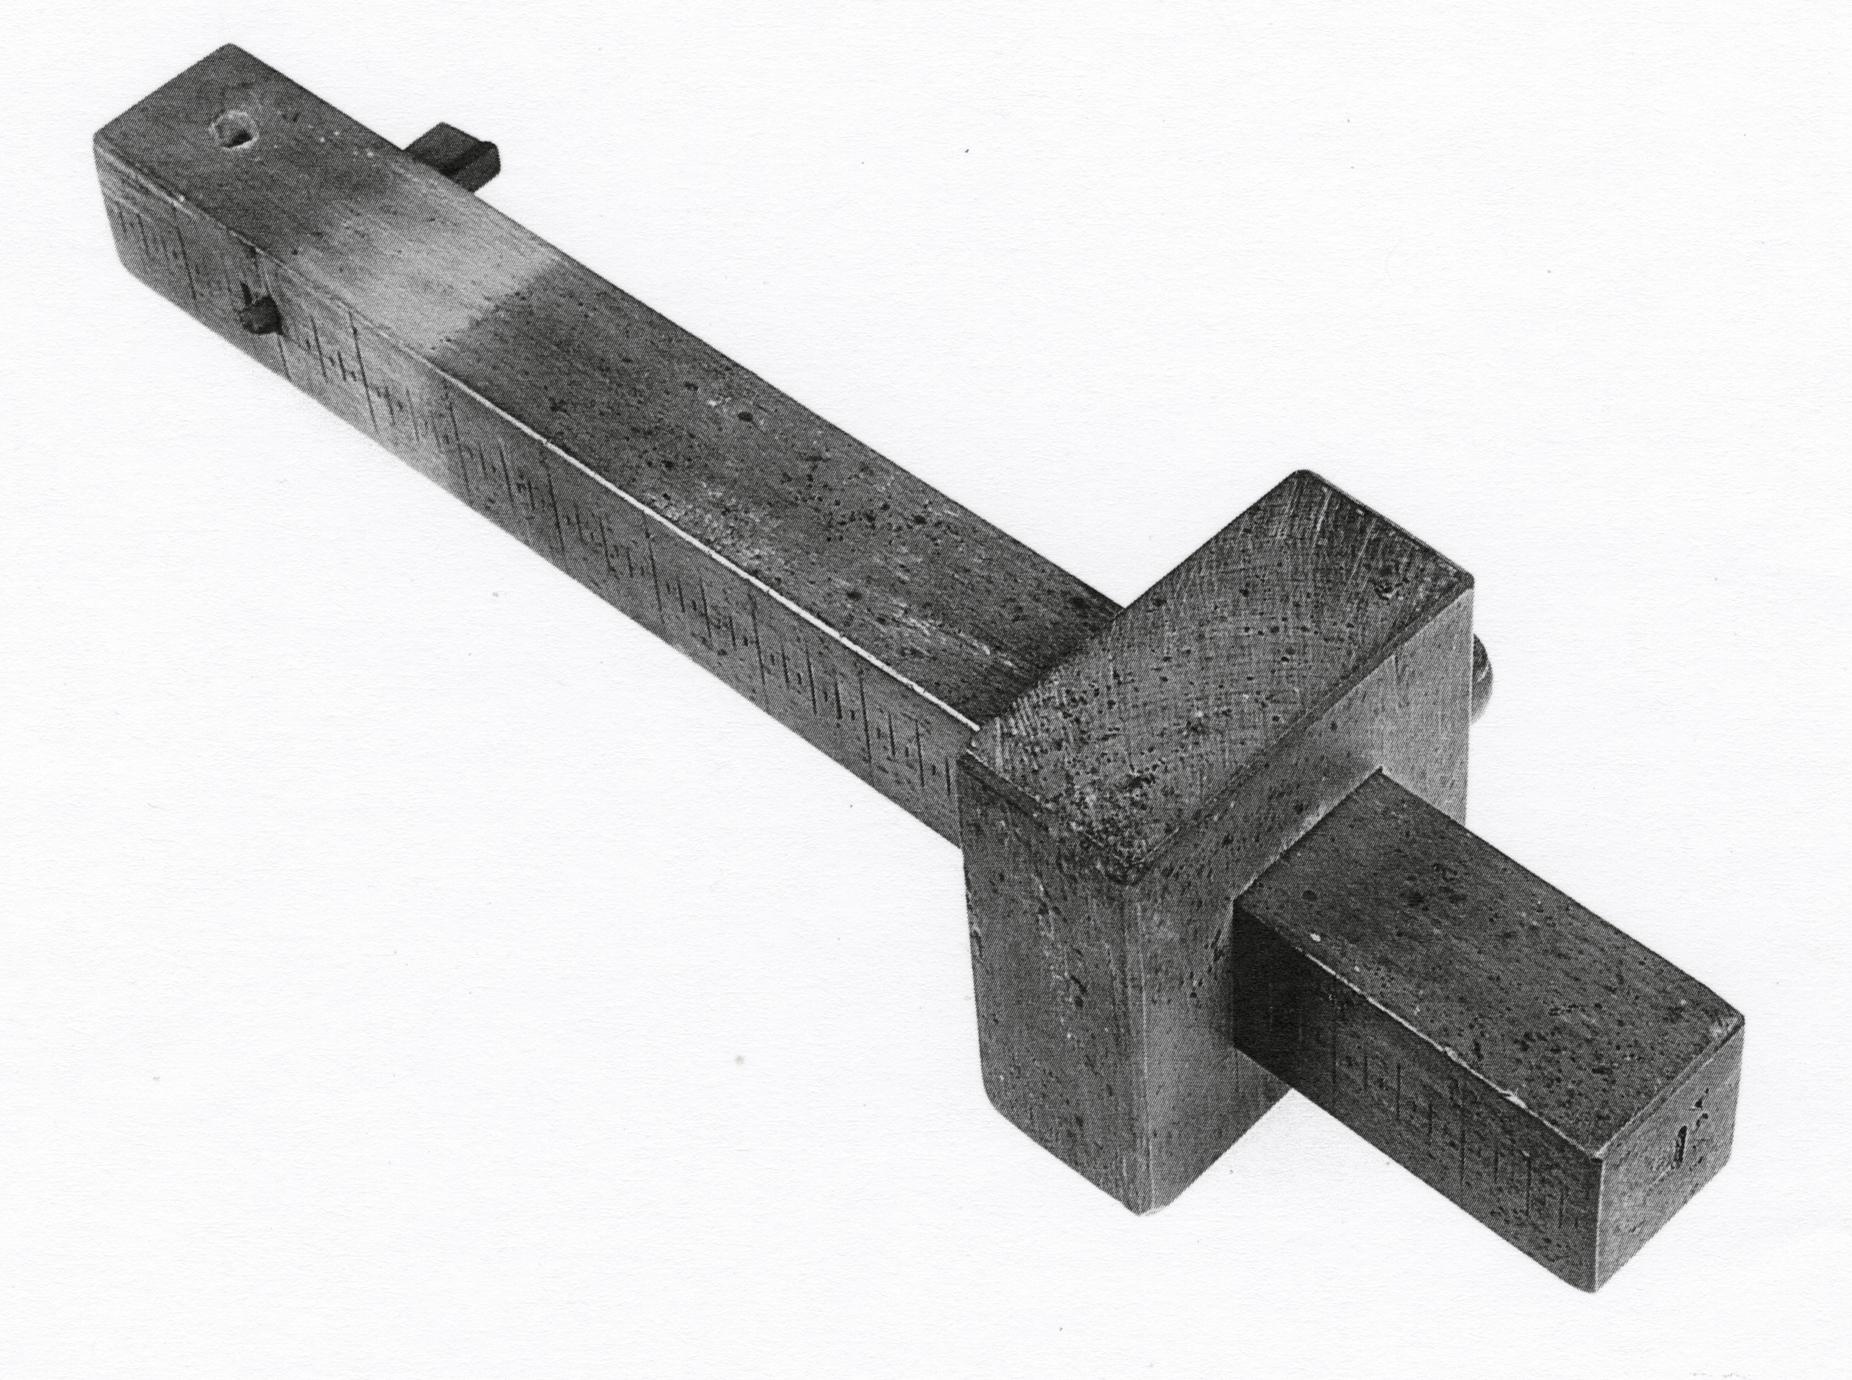 Example of a cutting gauge.